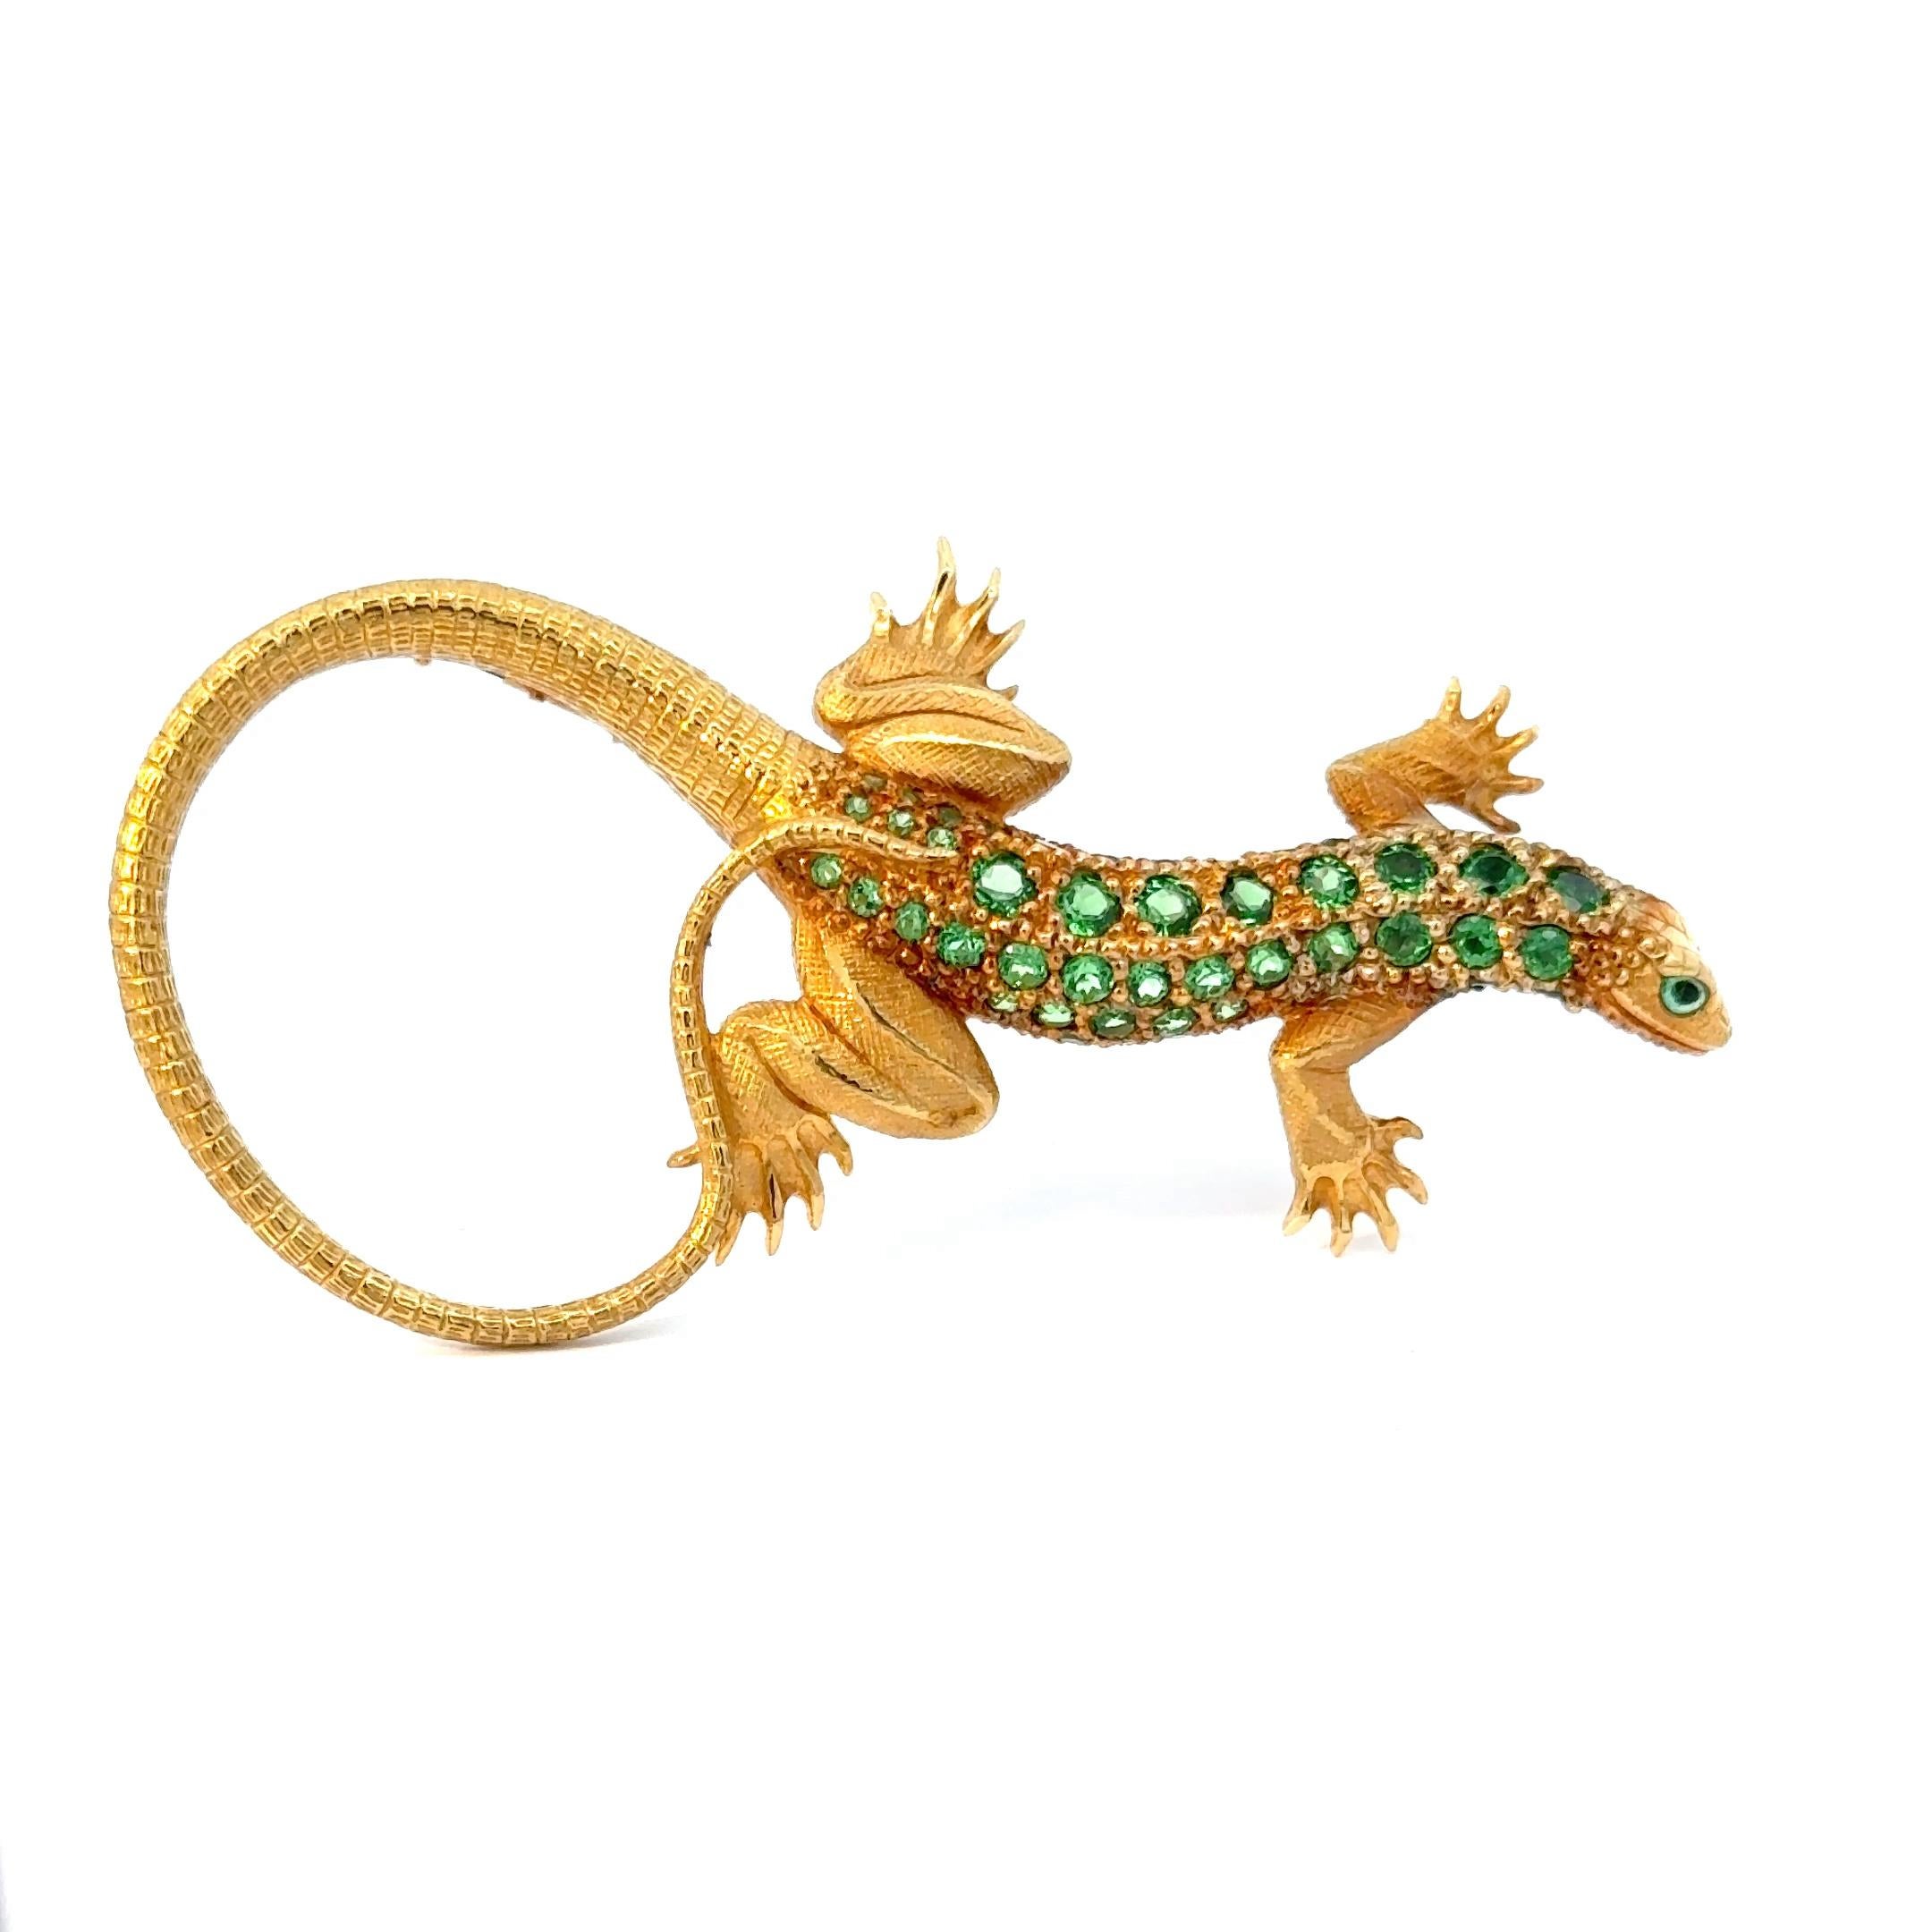 Designed by gemstone-carving-master Alfred Zimmermann, following his designs of his one of a kind gemstones carvings.
This unique brooch has been made in our own goldsmith workshop in Idar-Oberstein. The brooch was handmade in 18ct yellow gold, set